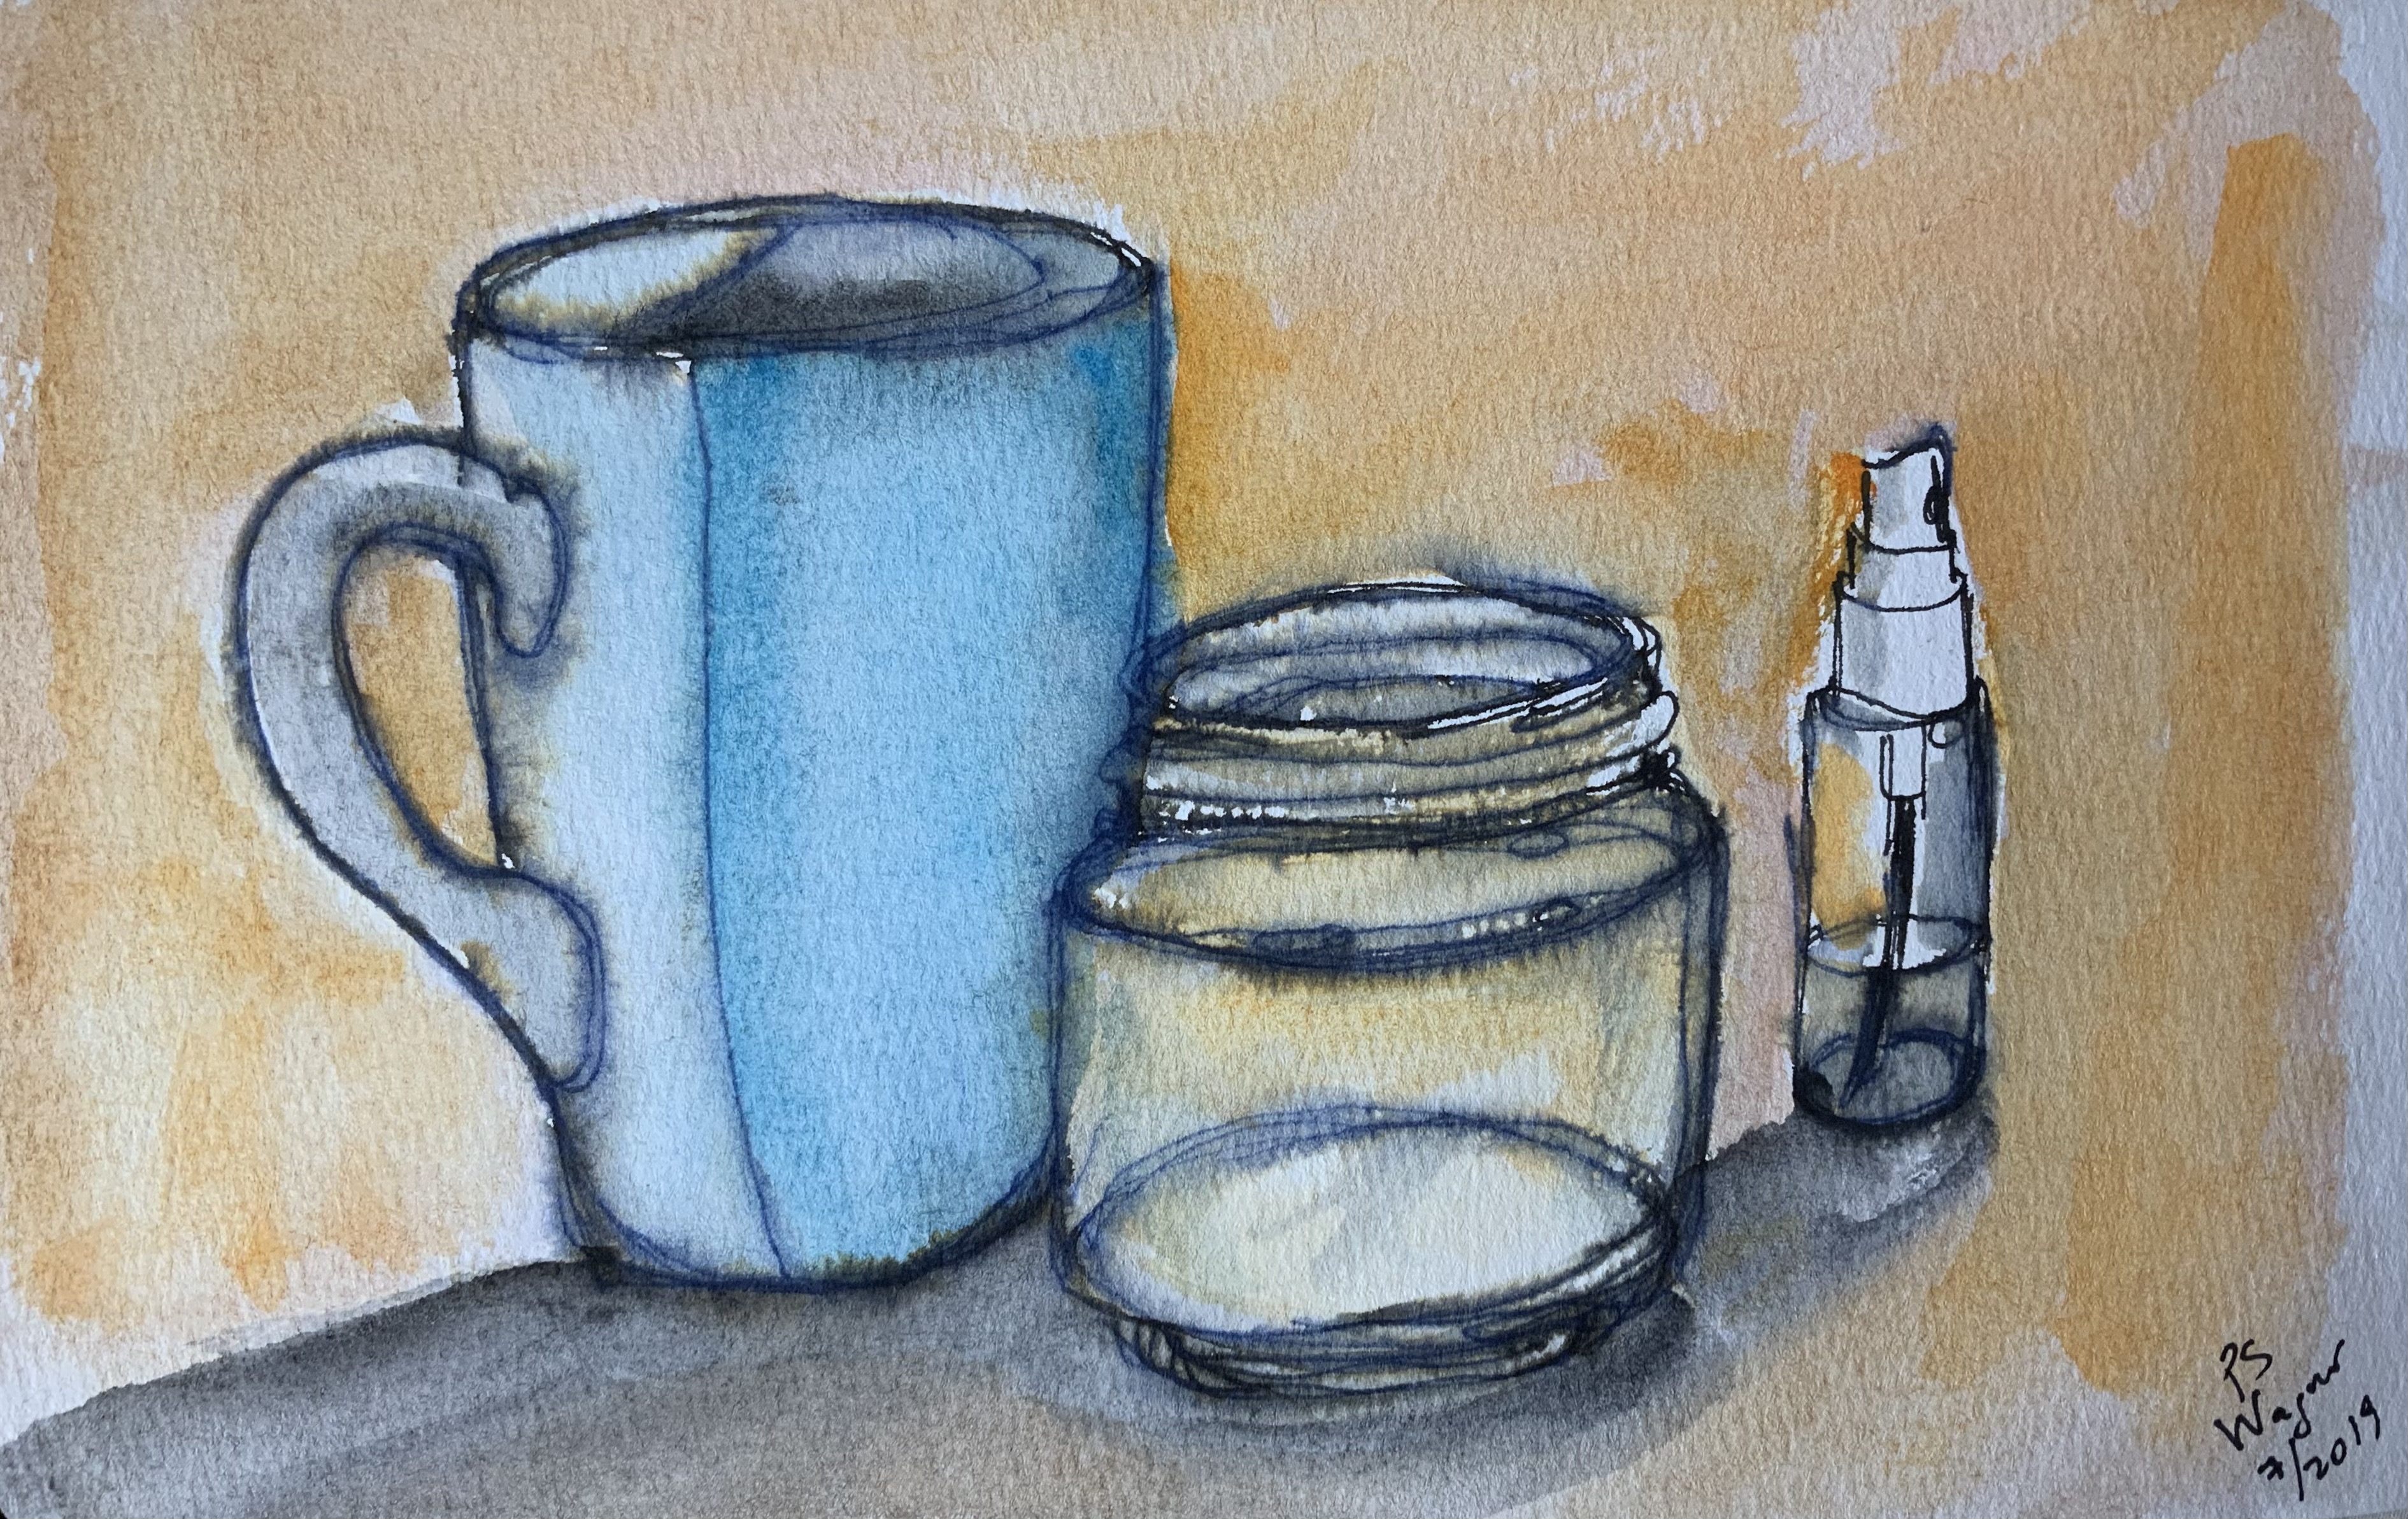 Cup, Jar and Mini Spray bottle